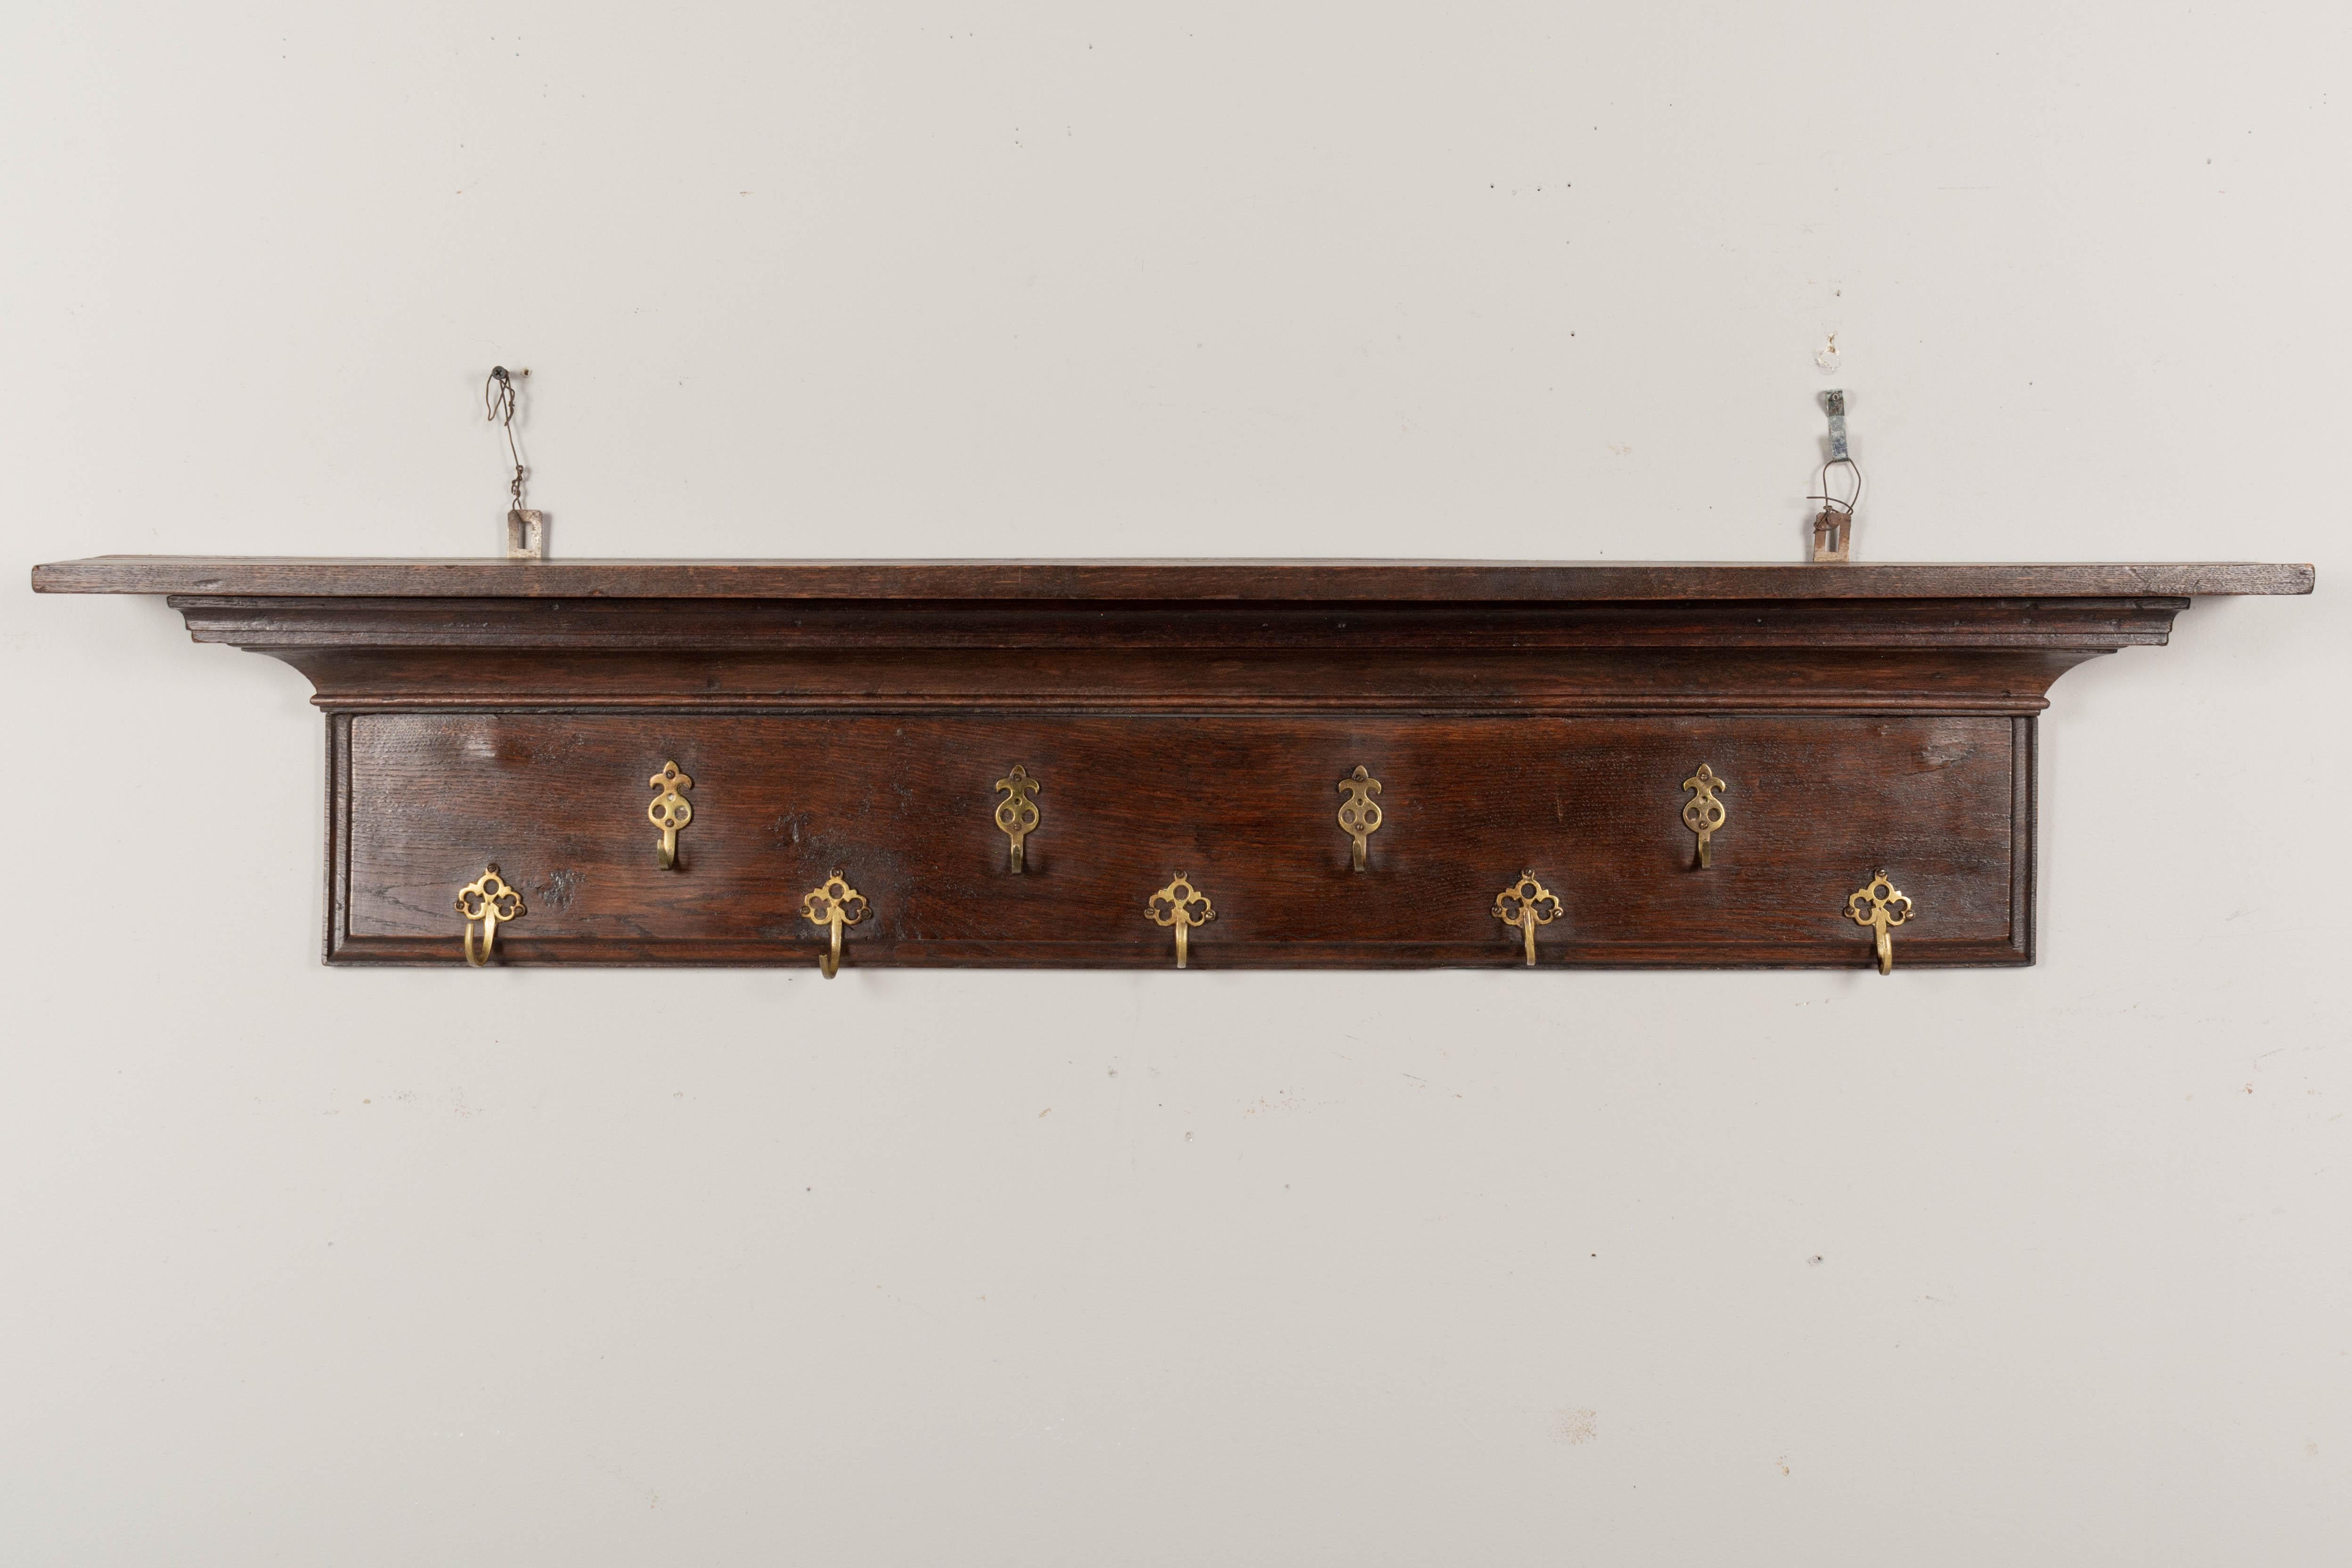 A French oak potière, or shelf with nine brass hooks for hanging pots and pans in the kitchen. The top ledge has two grooves to display plates and platters.